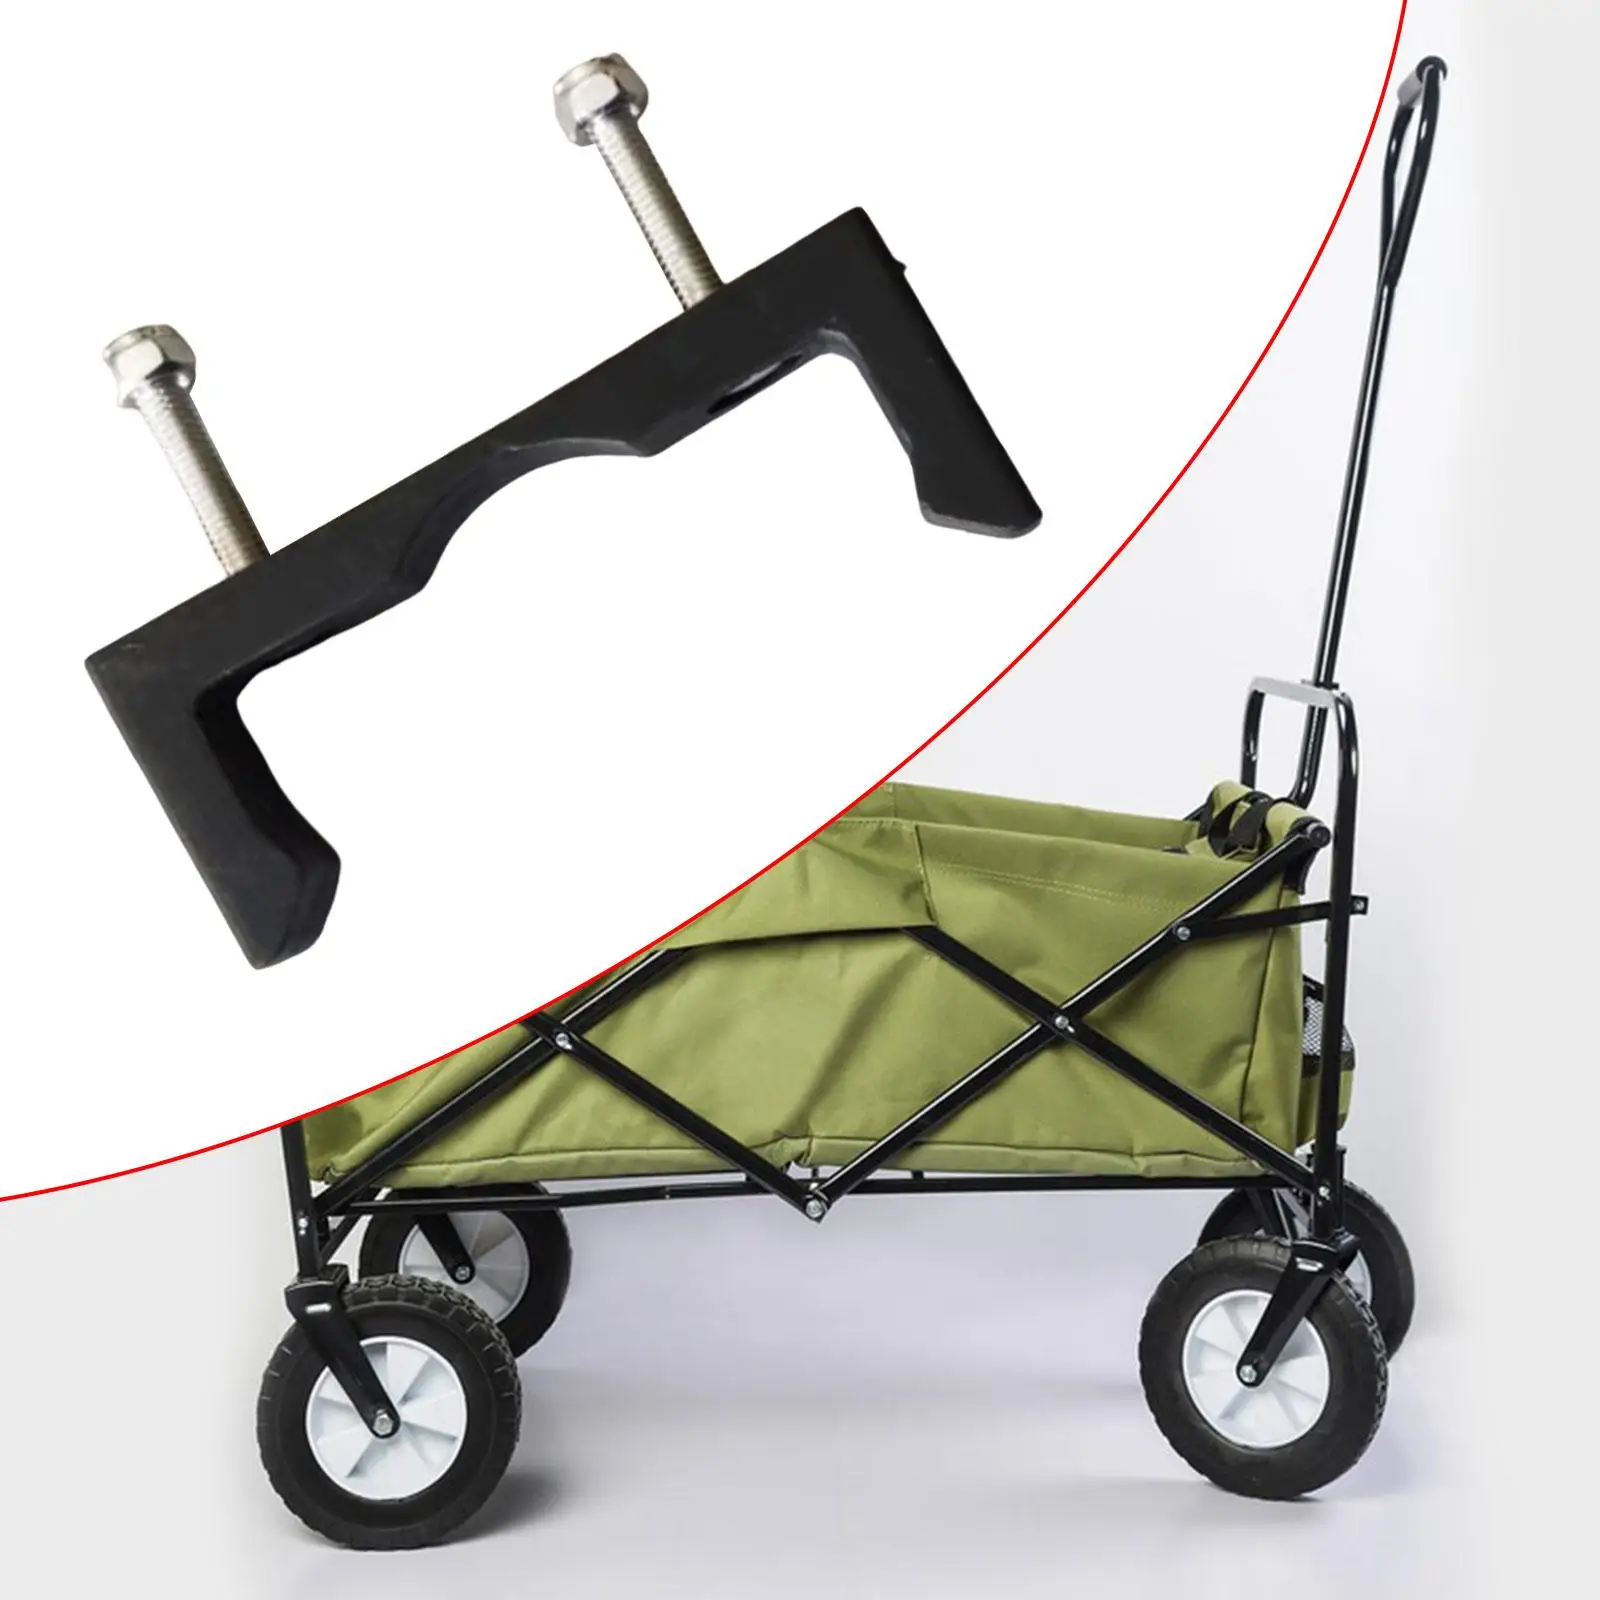 Folding Utility Wagon Pull Push Handle Fixed Buckle Collapsible Wagon Cart Pull Push Handle Fixed Buckle for Shopping Outdoor